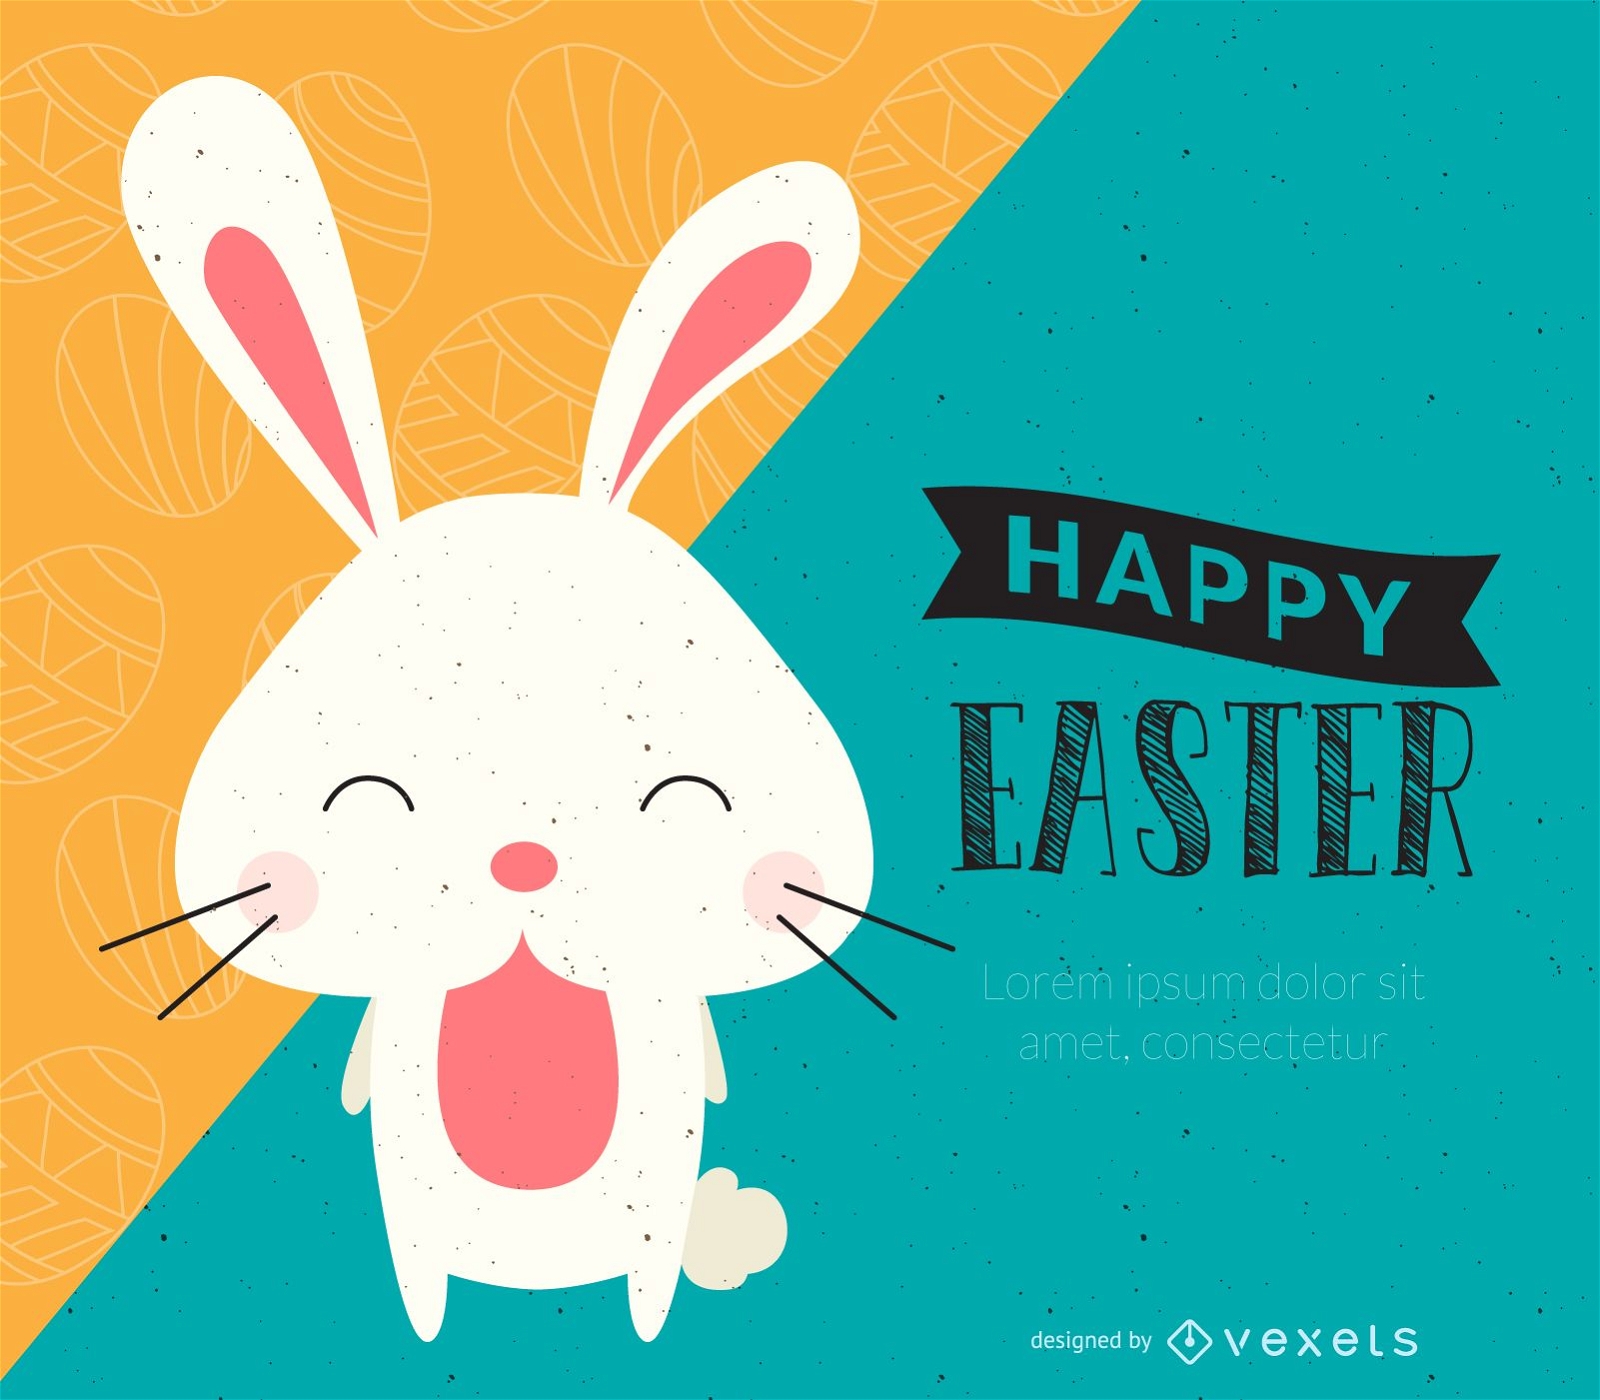 Happy Easter illustrated design